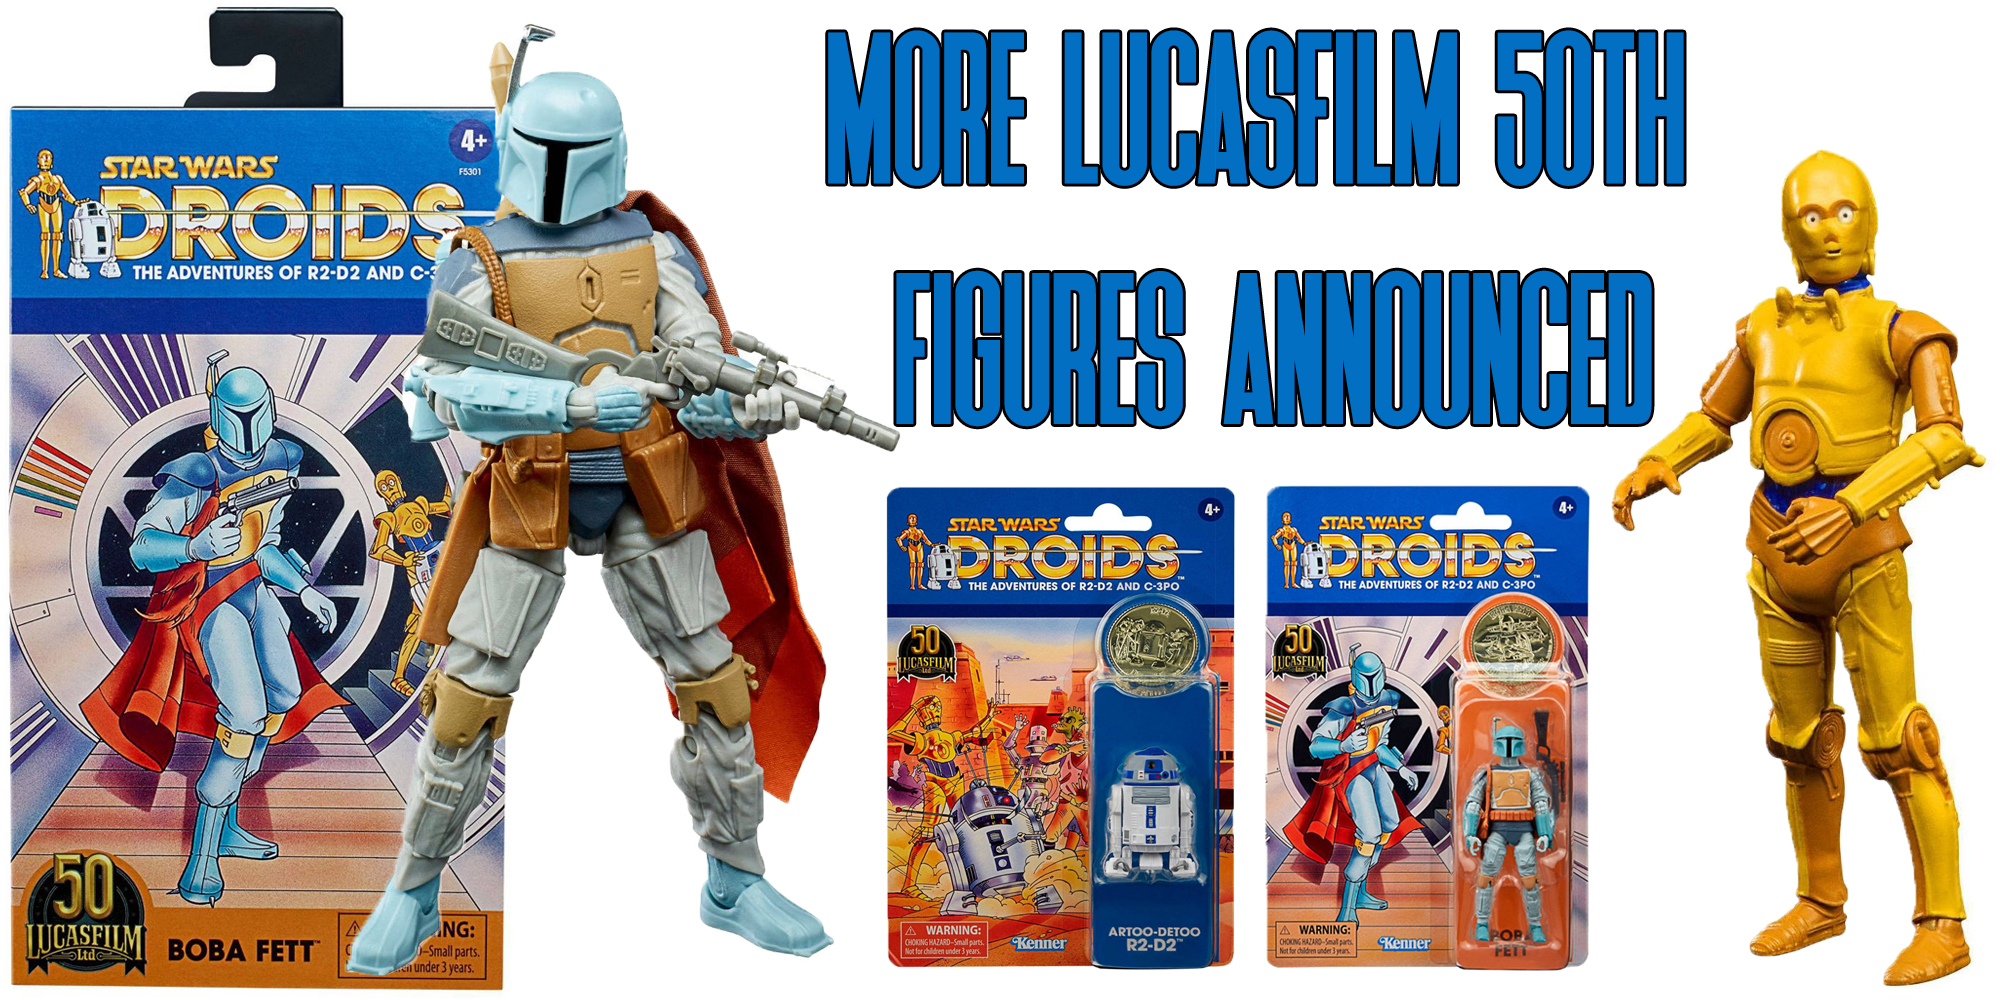 Hasbro Celebrates The 1985 Star Wars Droids TV Series With New Figures